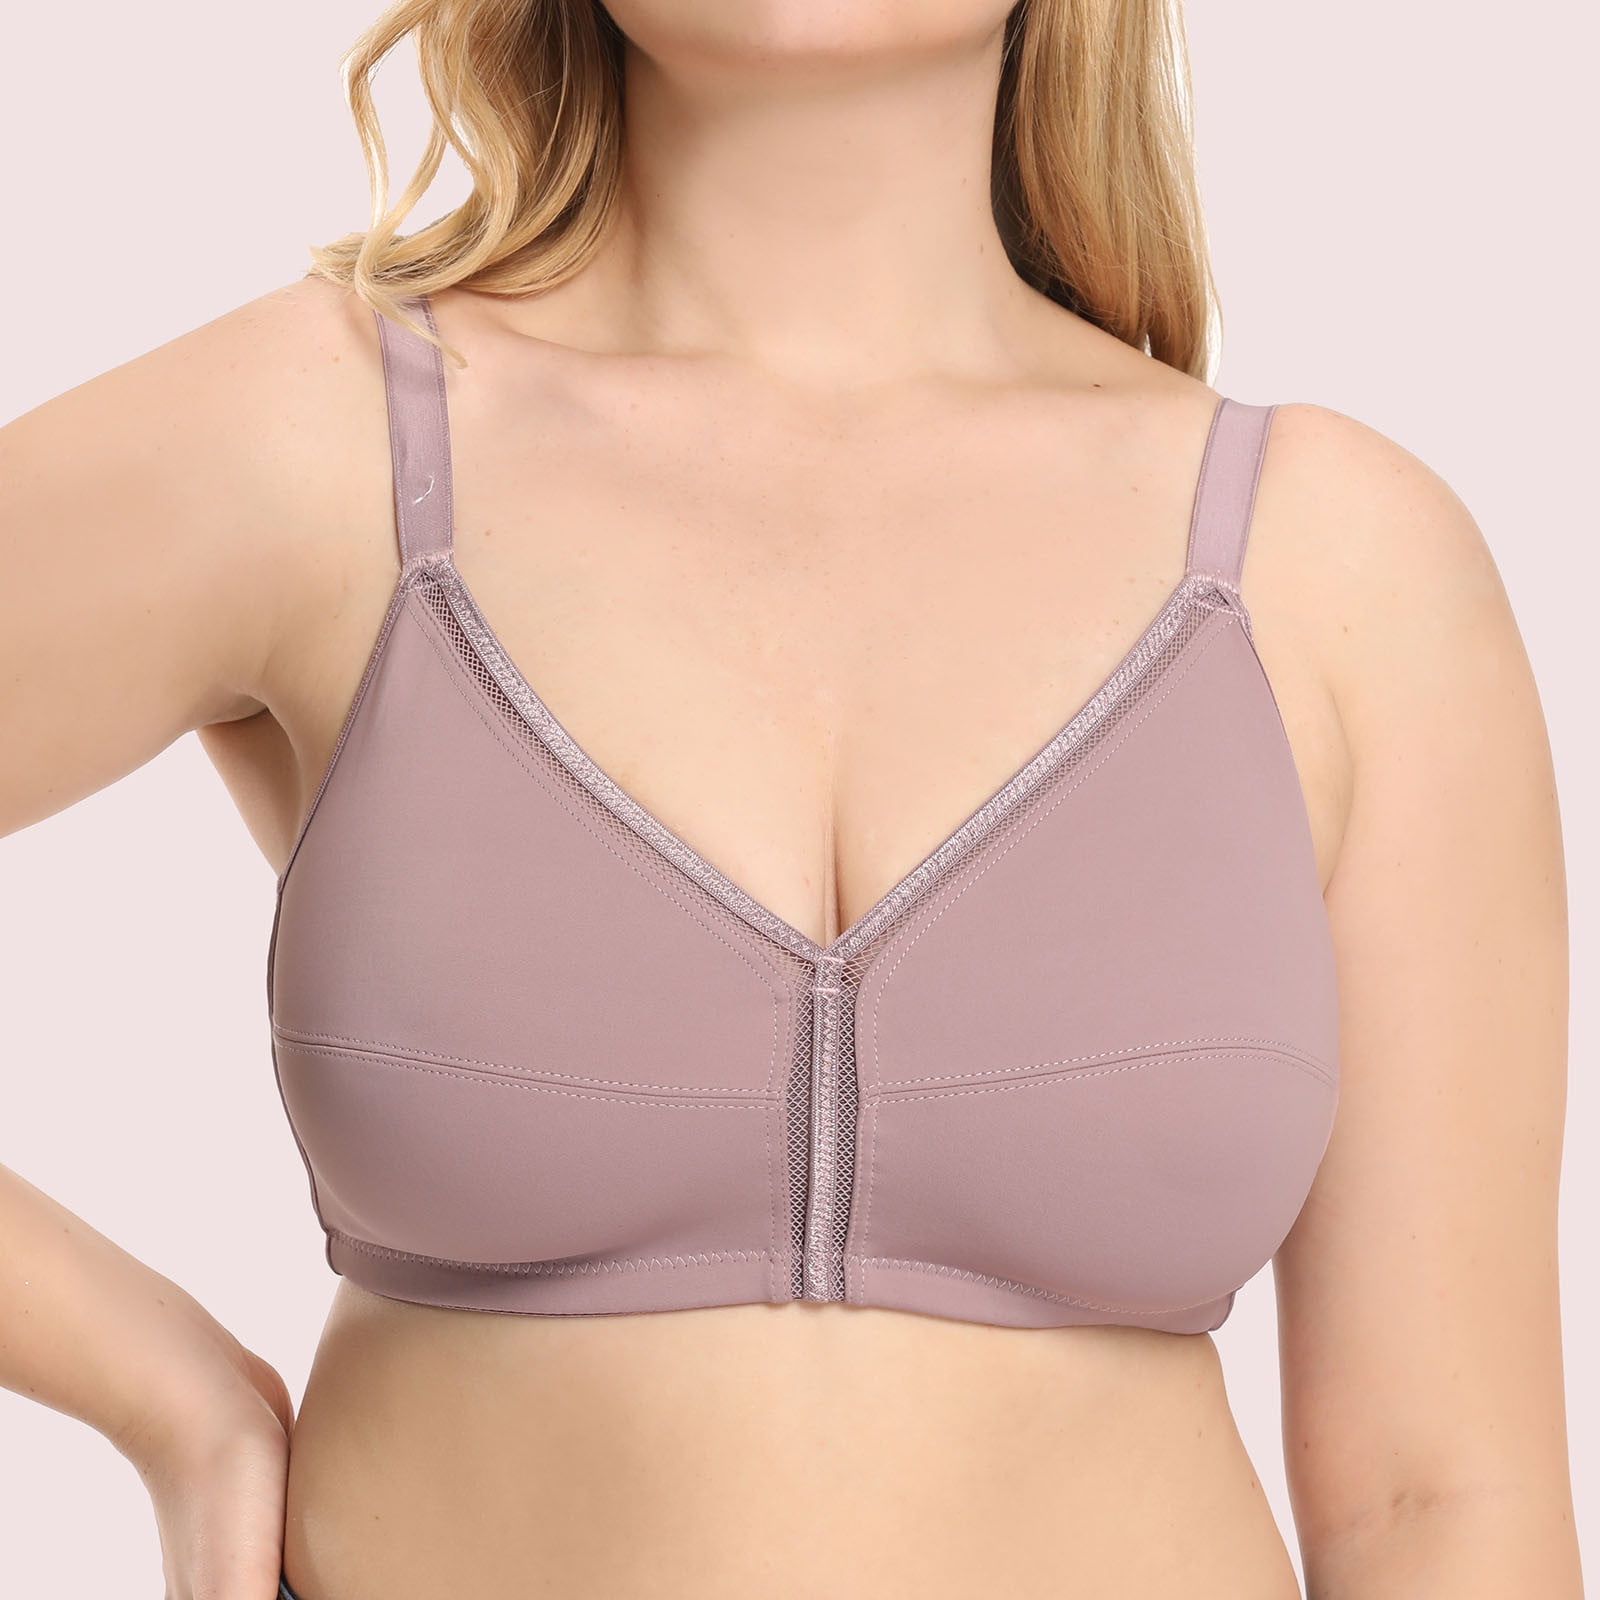 SELONE Everyday Bras for Women Push Up No Underwire Plus Size Lace